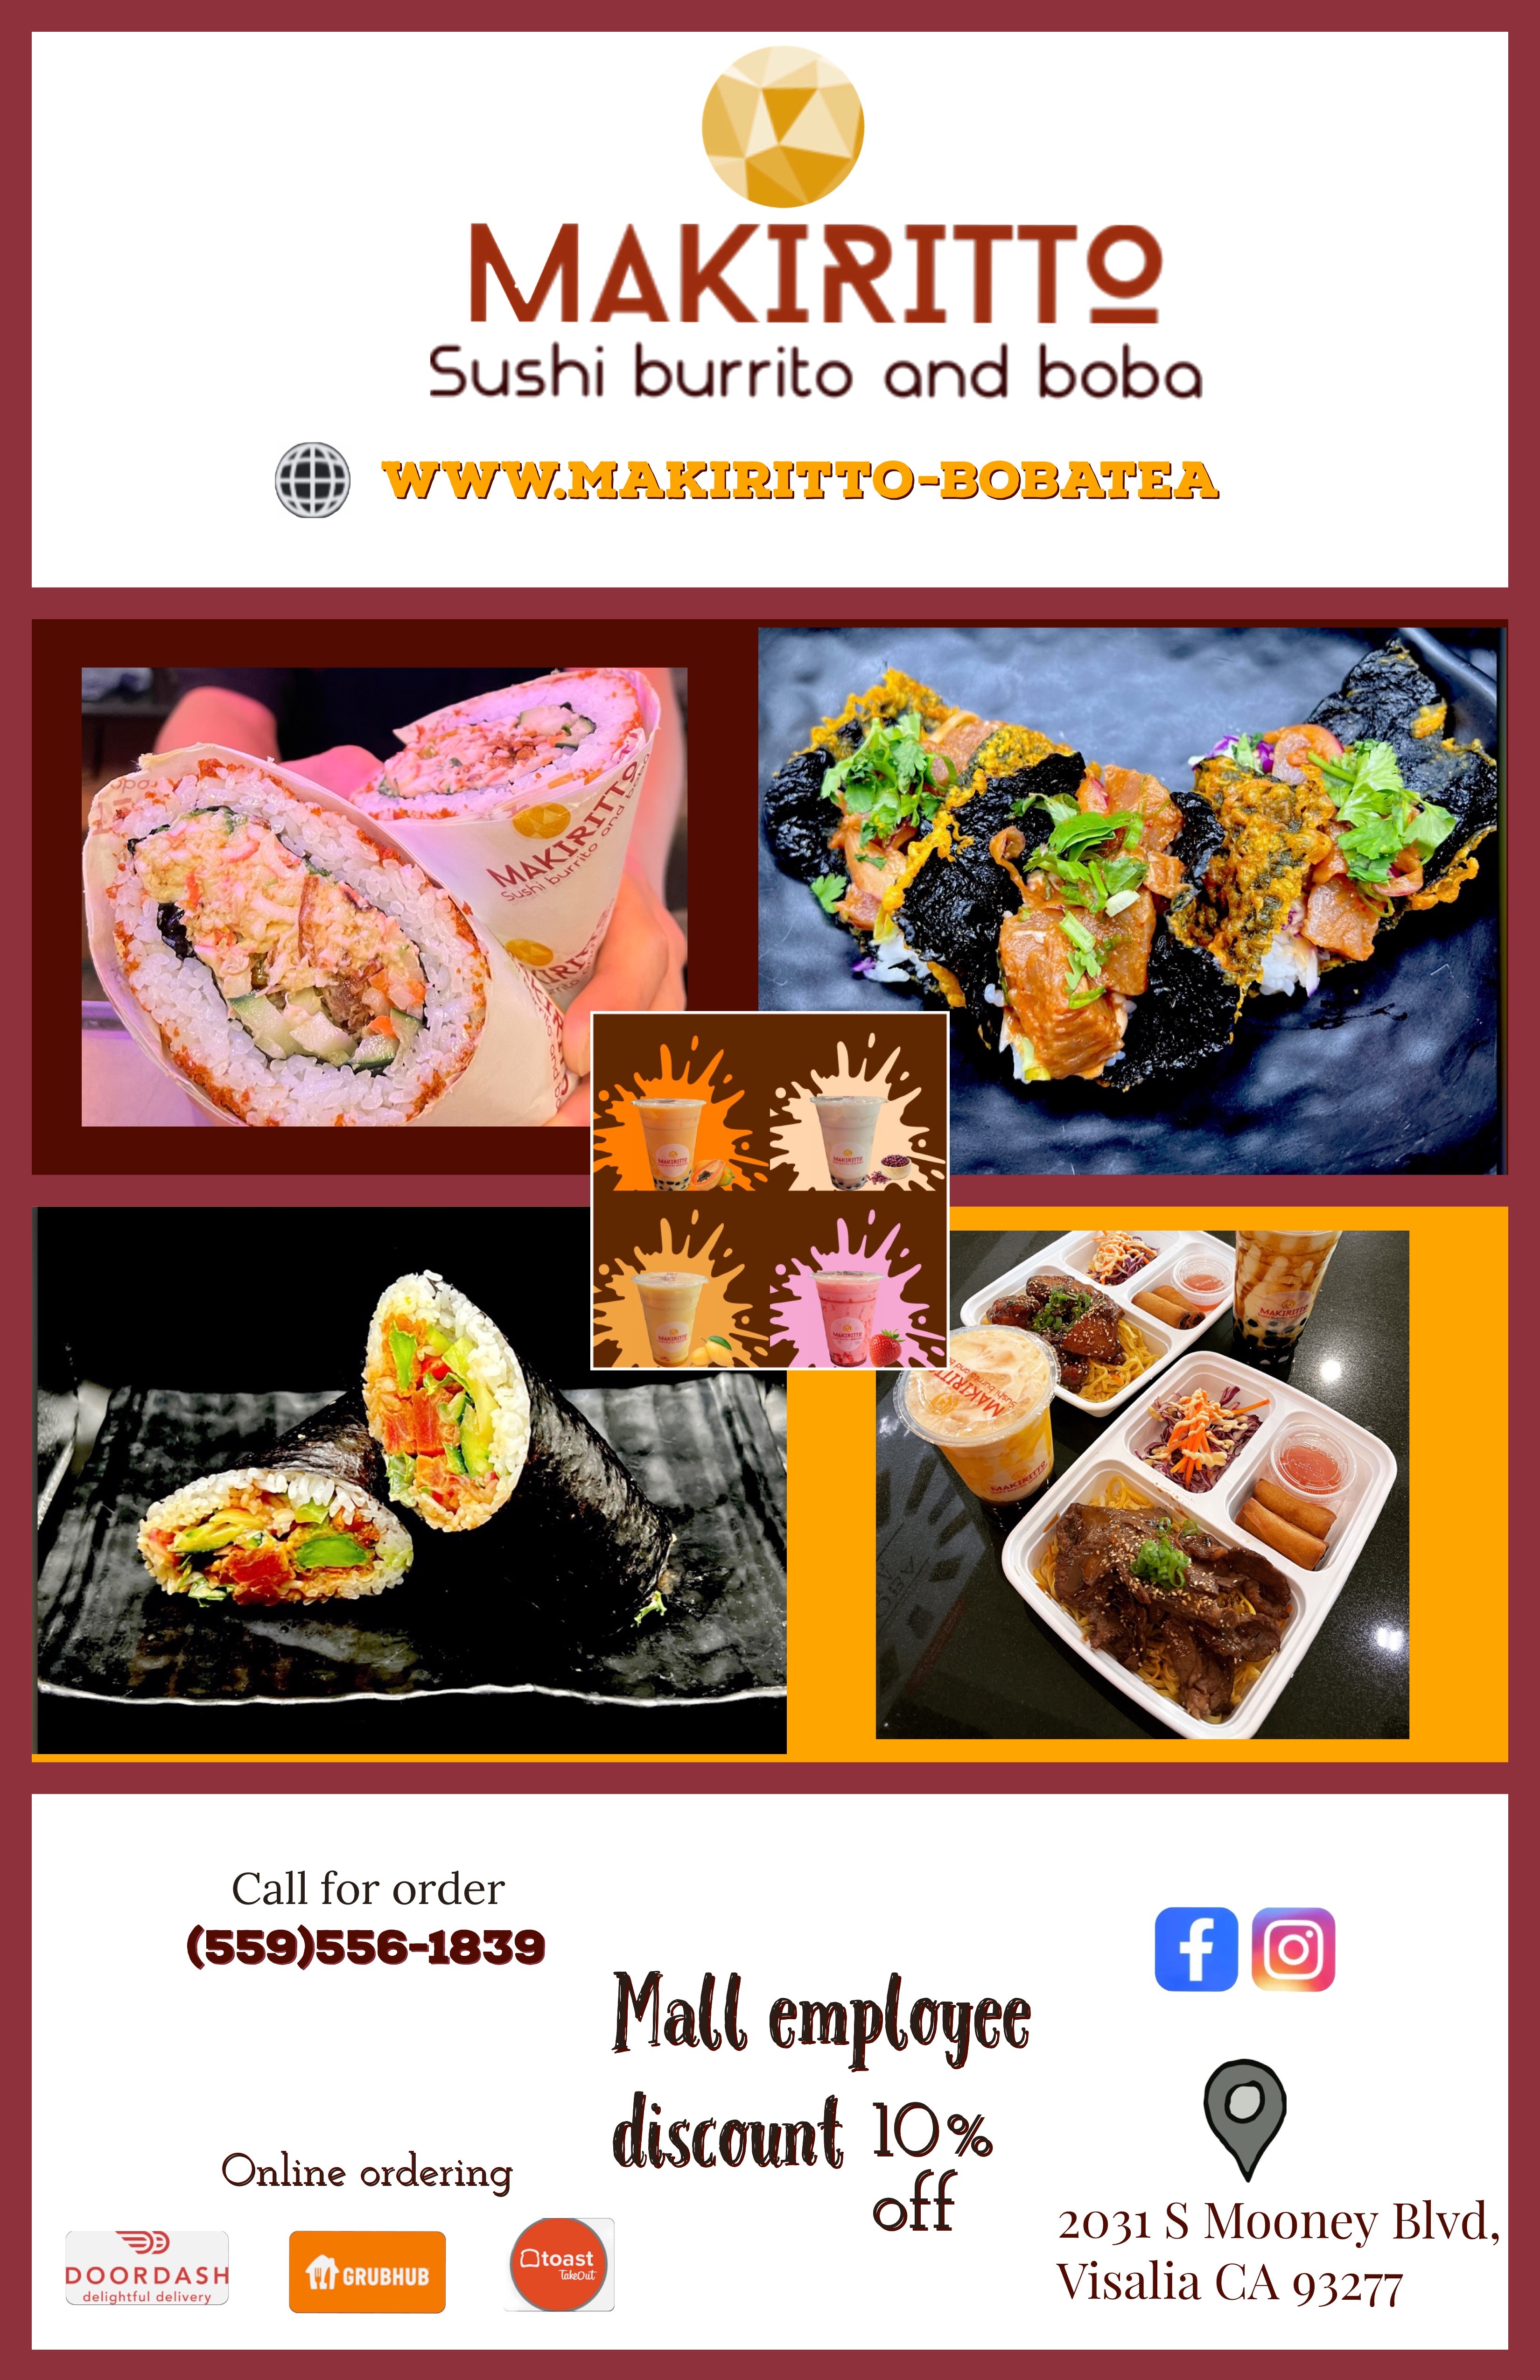 Sushi burritos and the best boba in town!